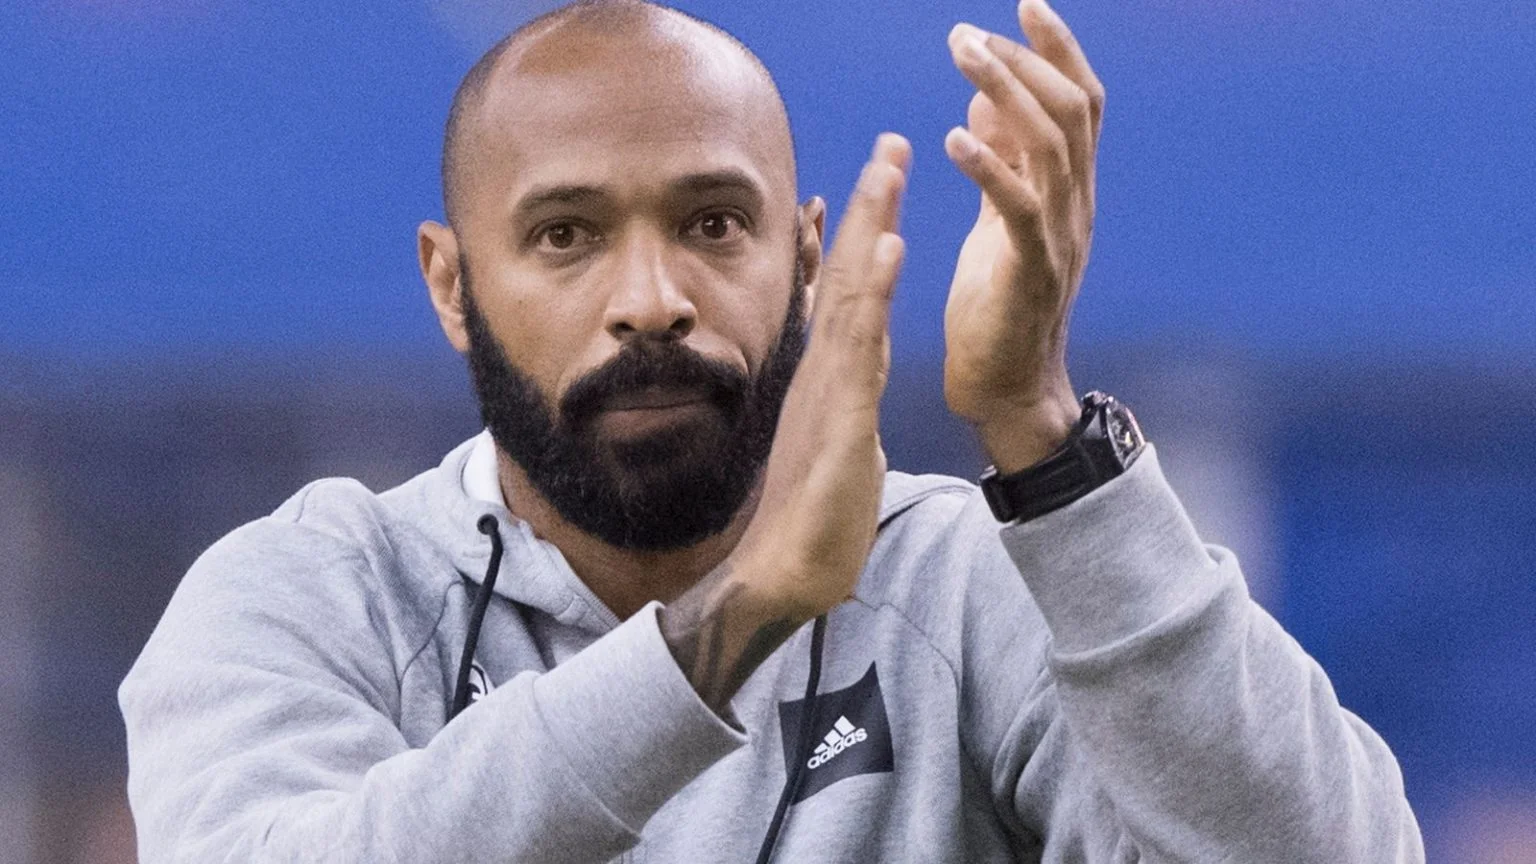 He couldn’t be boss – Thierry Henry makes claims about Messi, Neymar, Mbappe